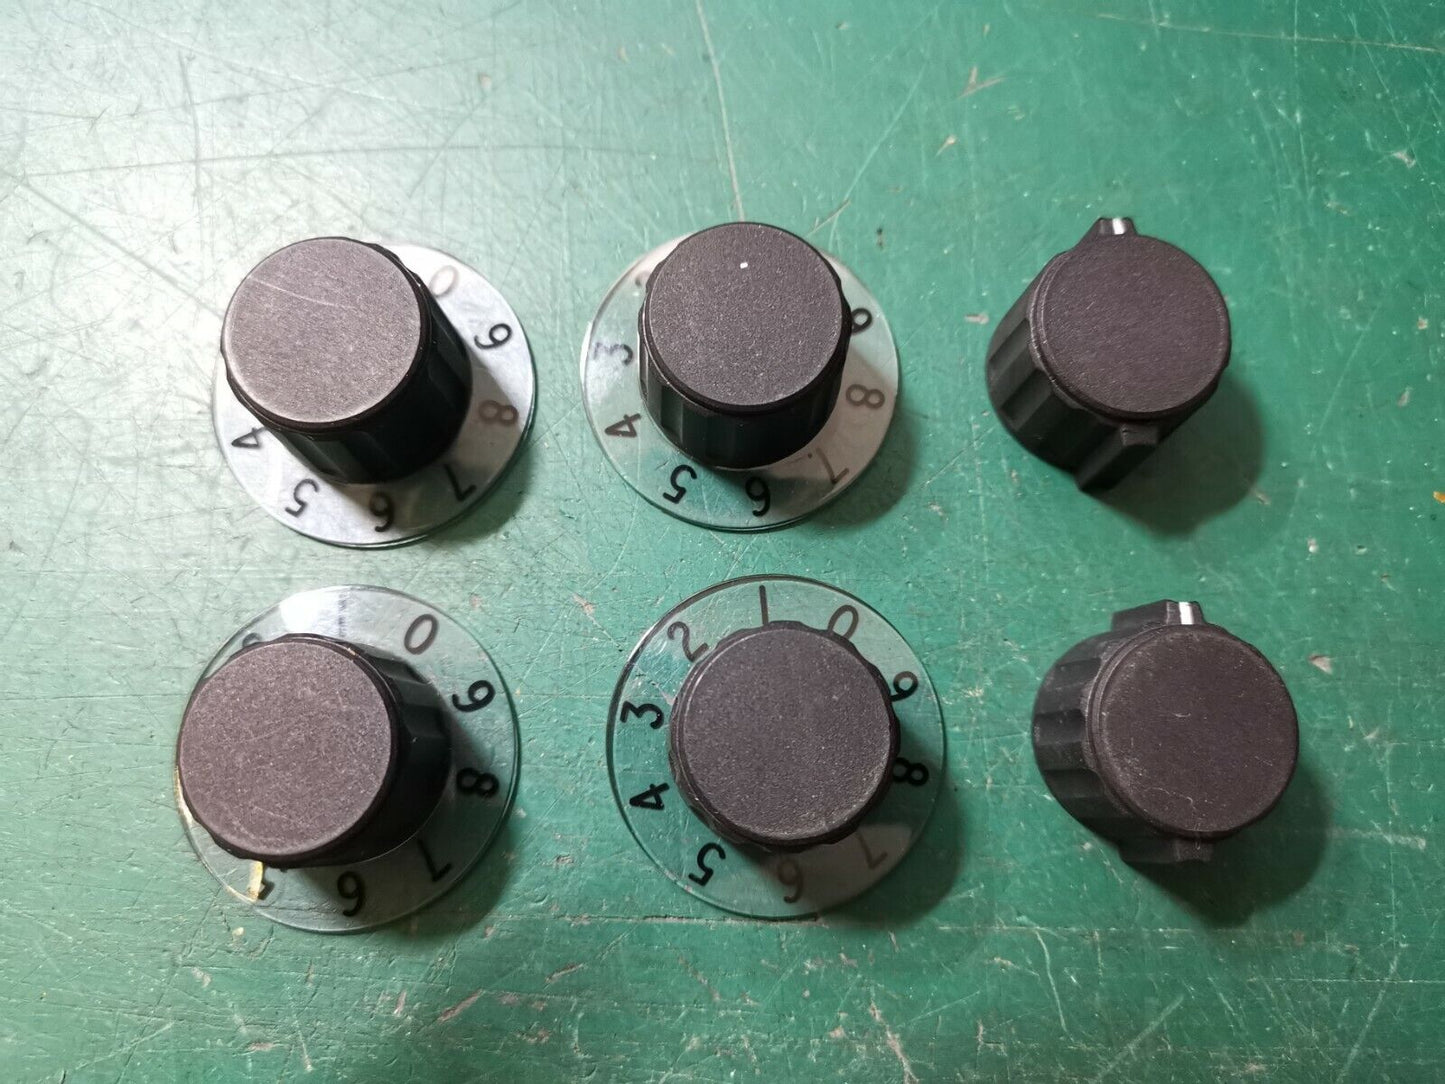 Elma Rotary Switch Knobs Numbered and Non Numbered